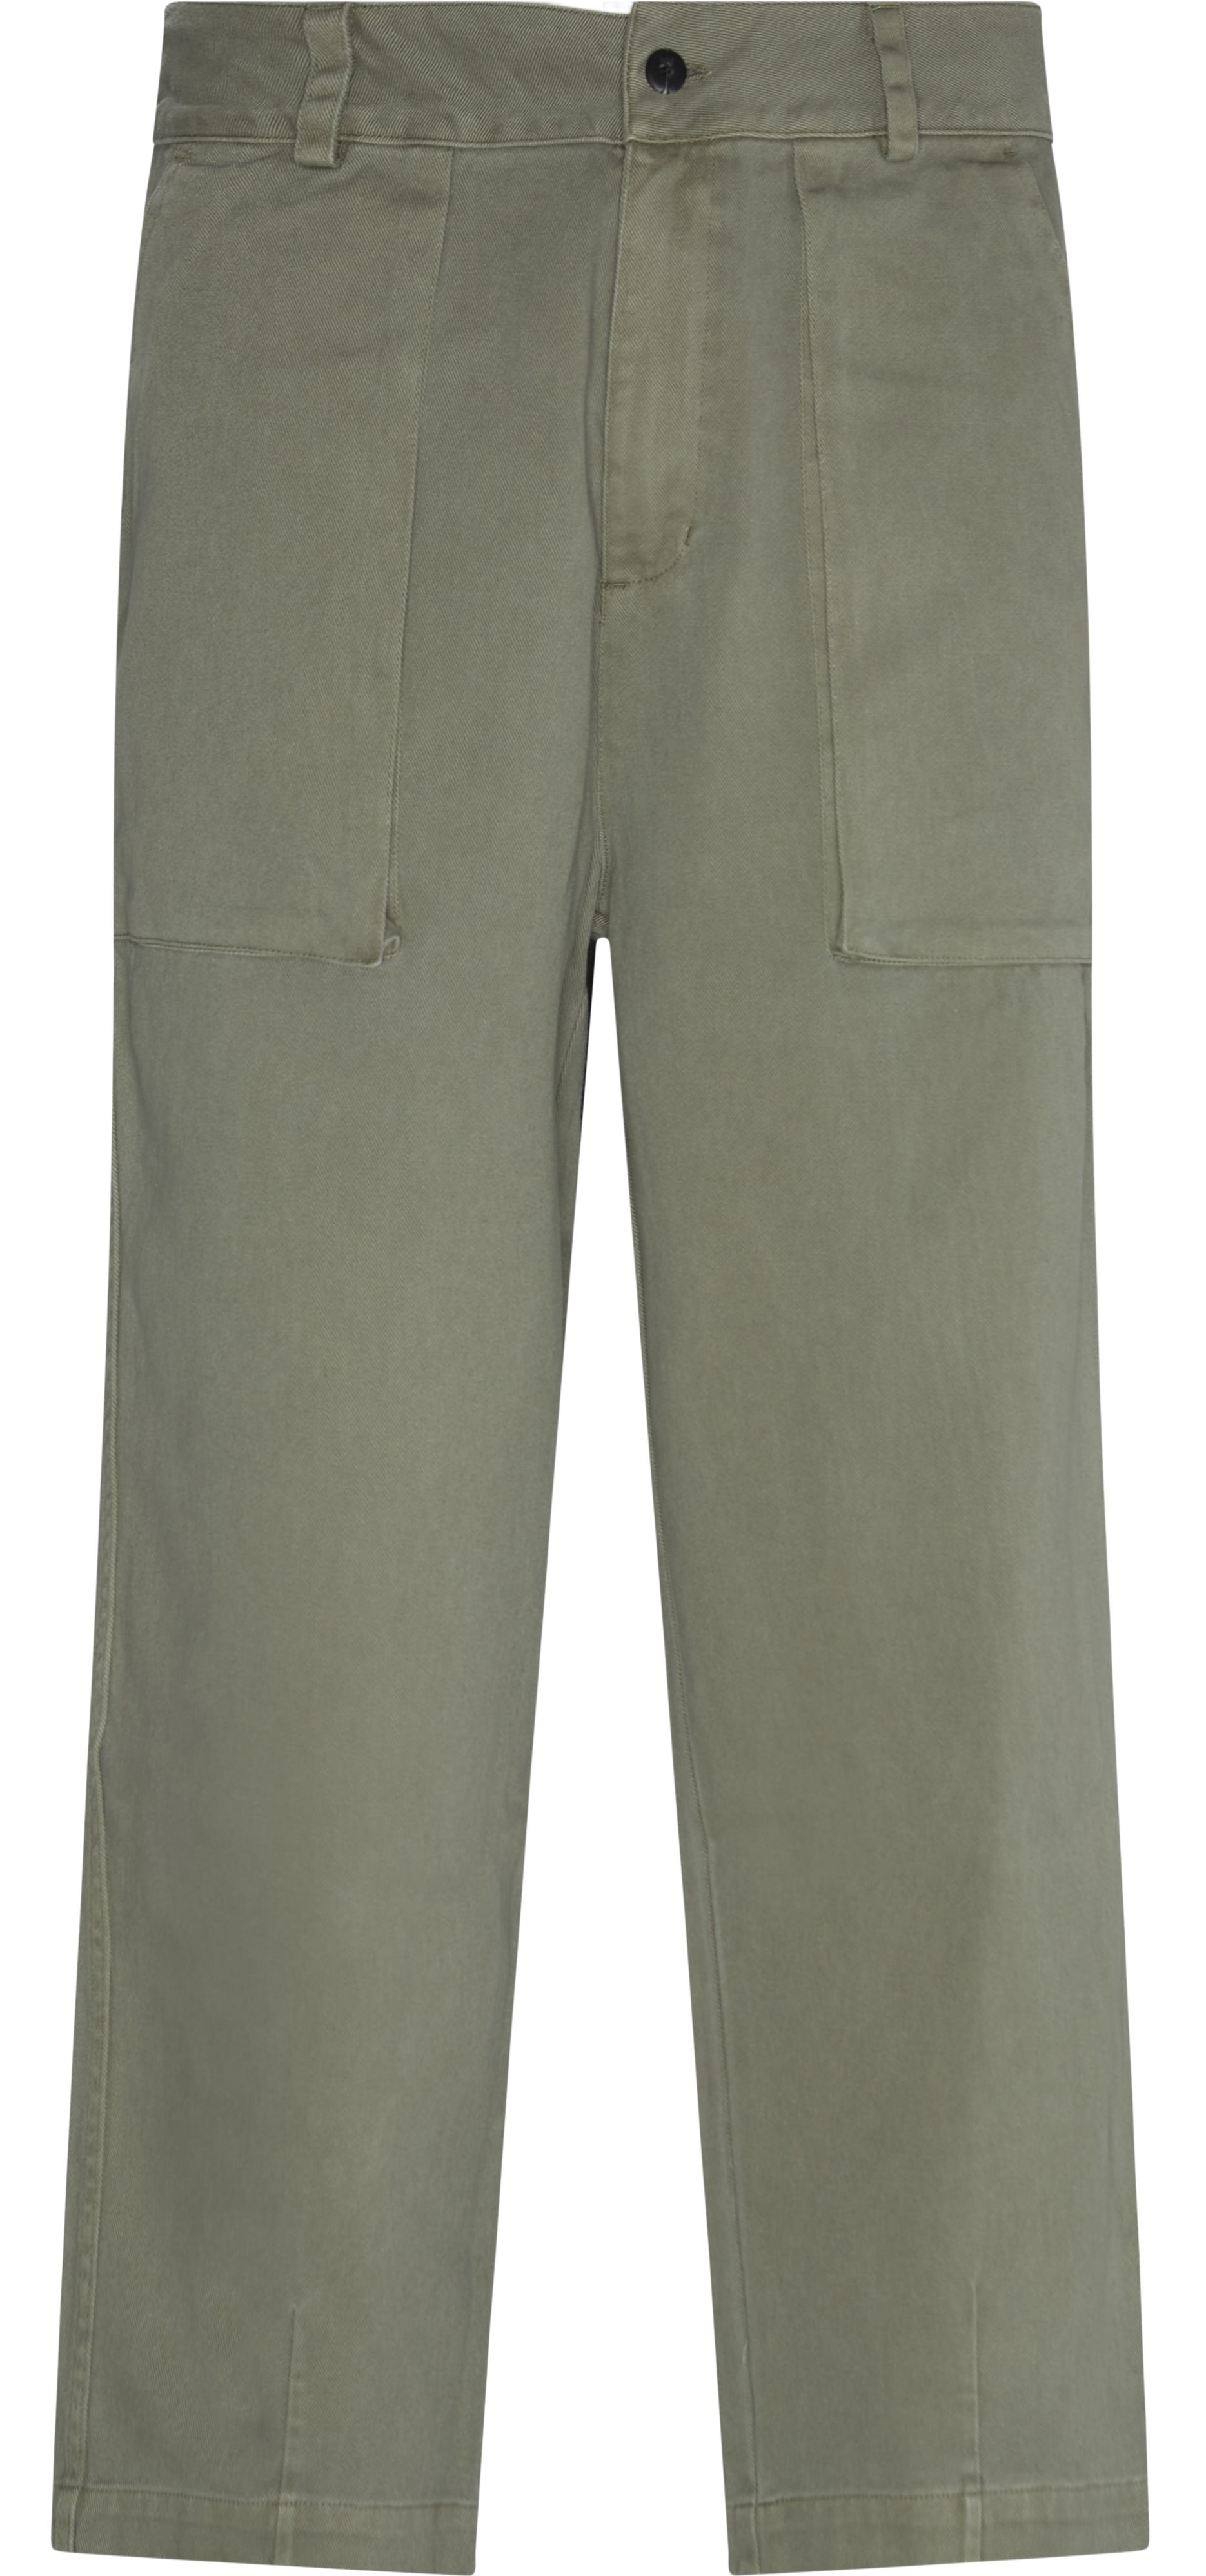 Relaxed Cotton Pant - Trousers - Loose fit - Green